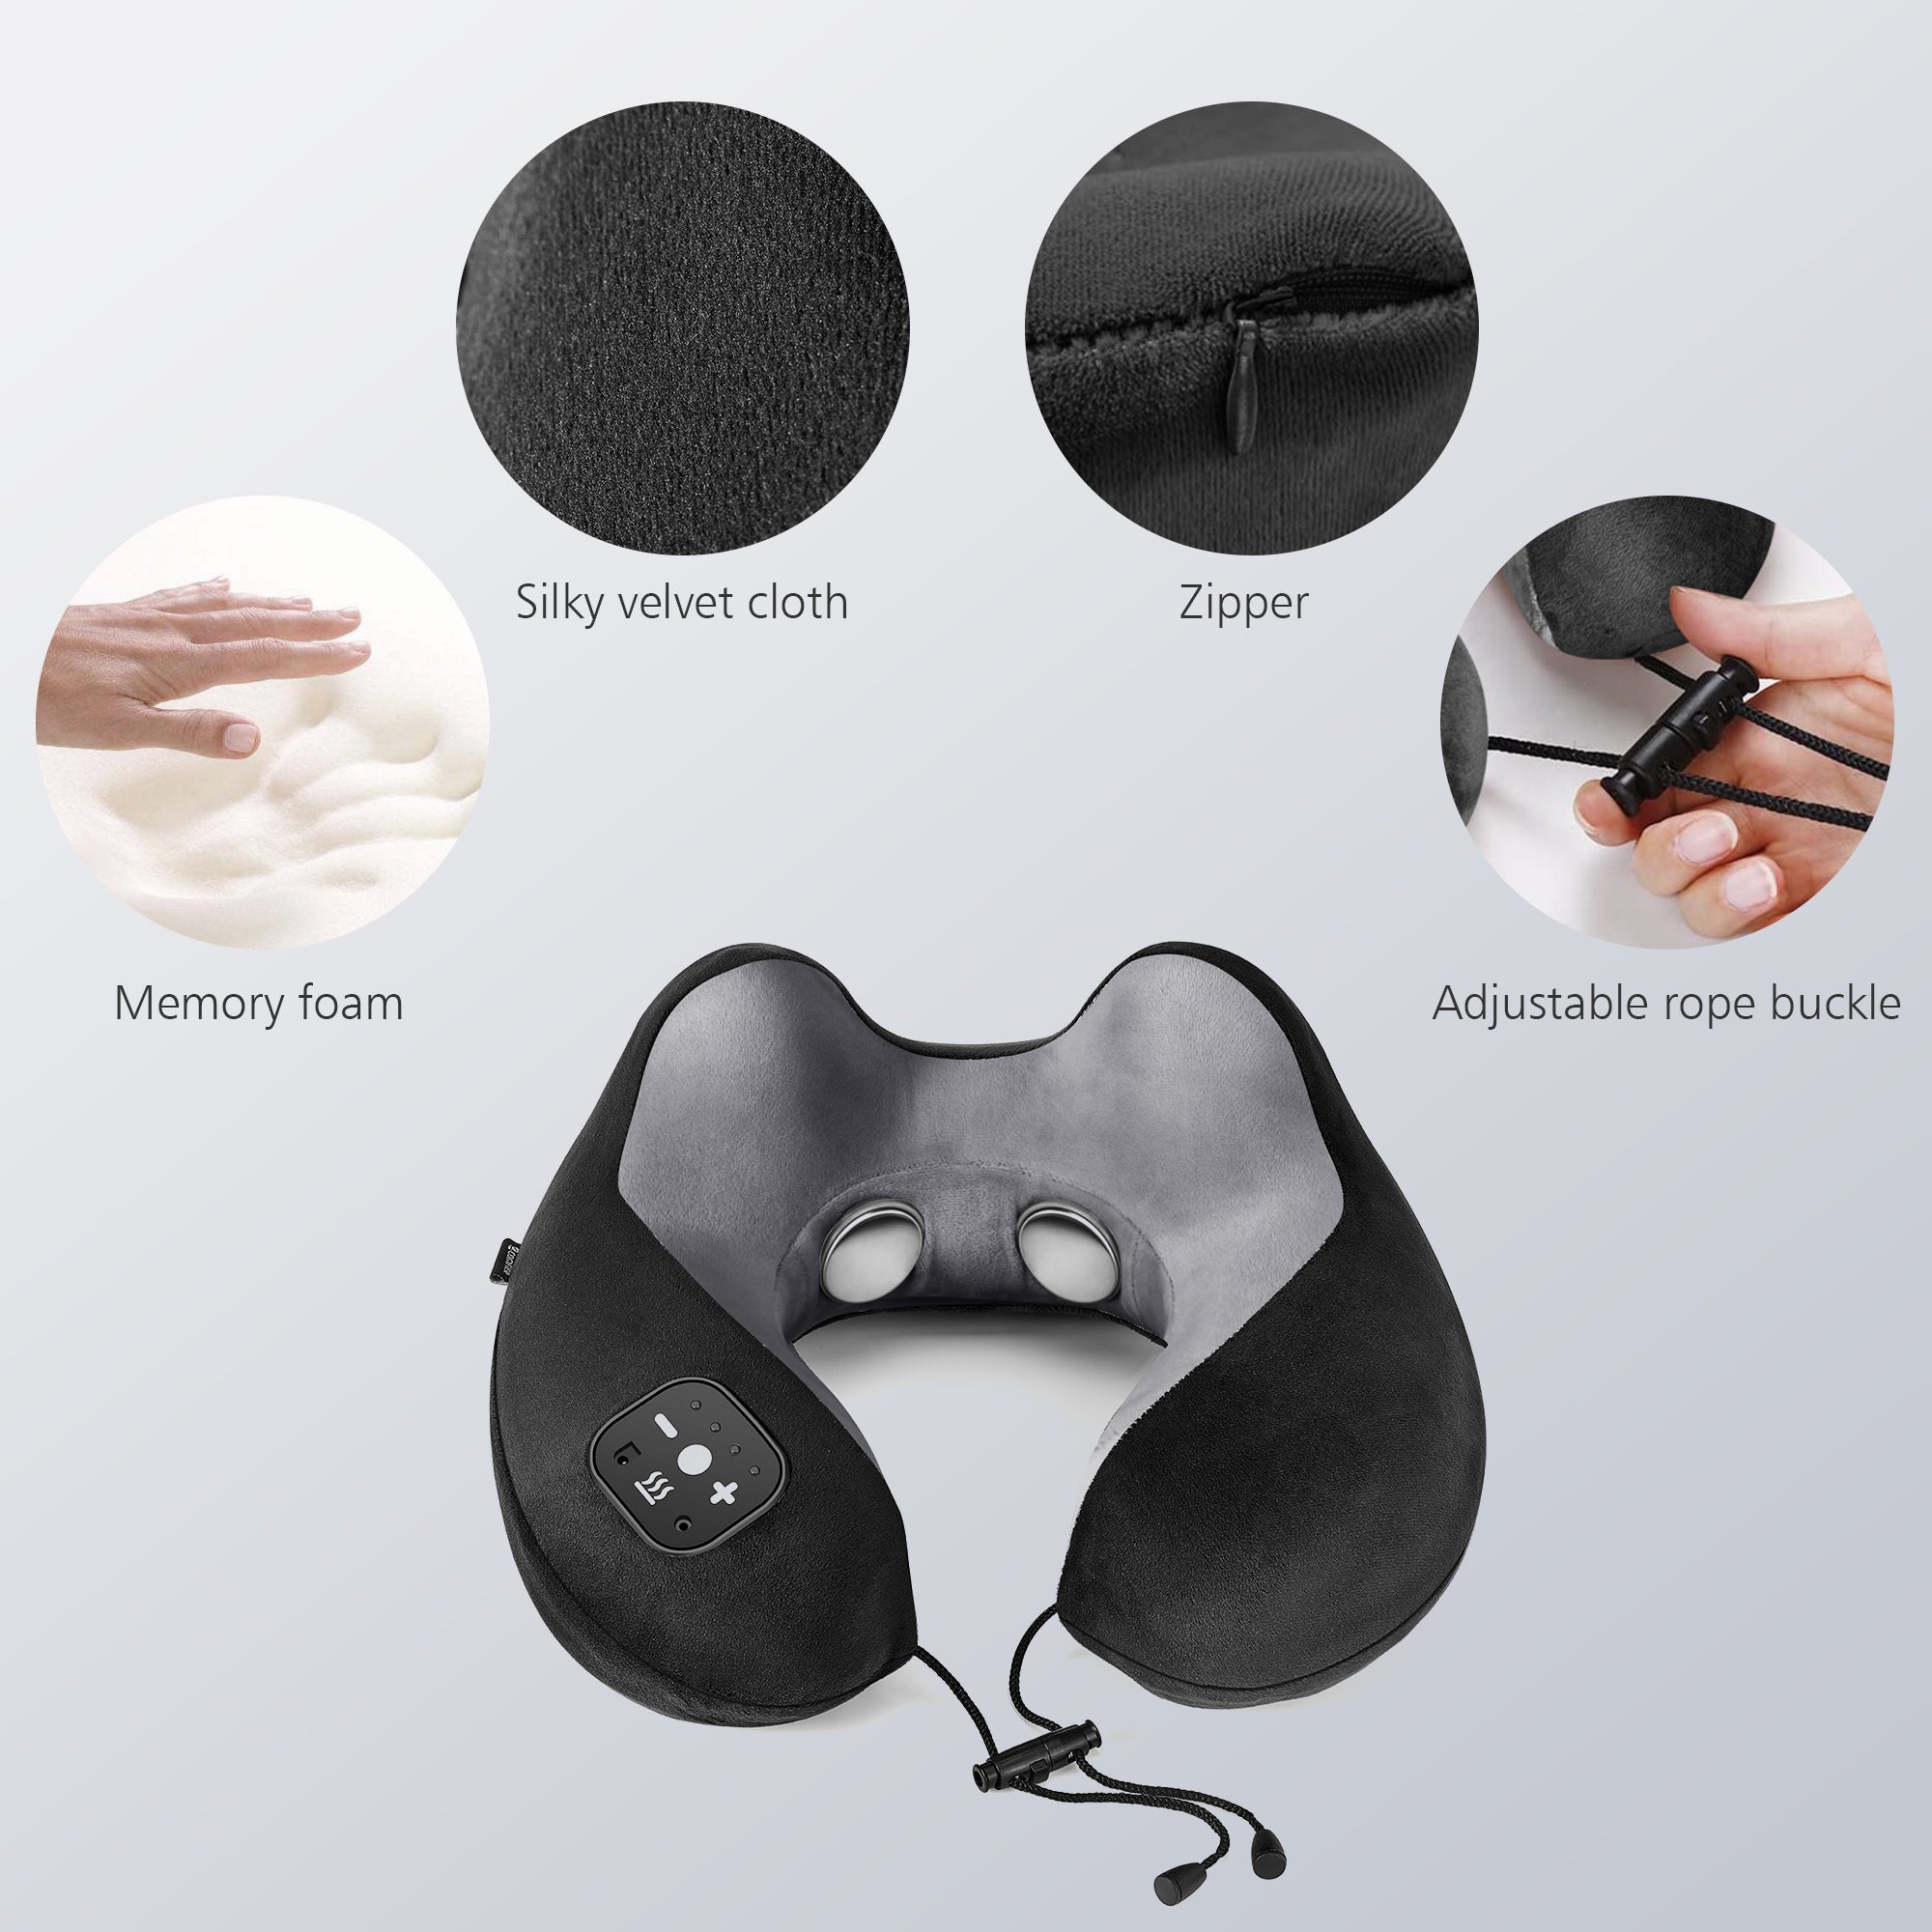 Certified Refurbished - Comfier Travel Pillow & Neck Massager with Heat, Memory Foam Neck Pillow - 6902U-USED